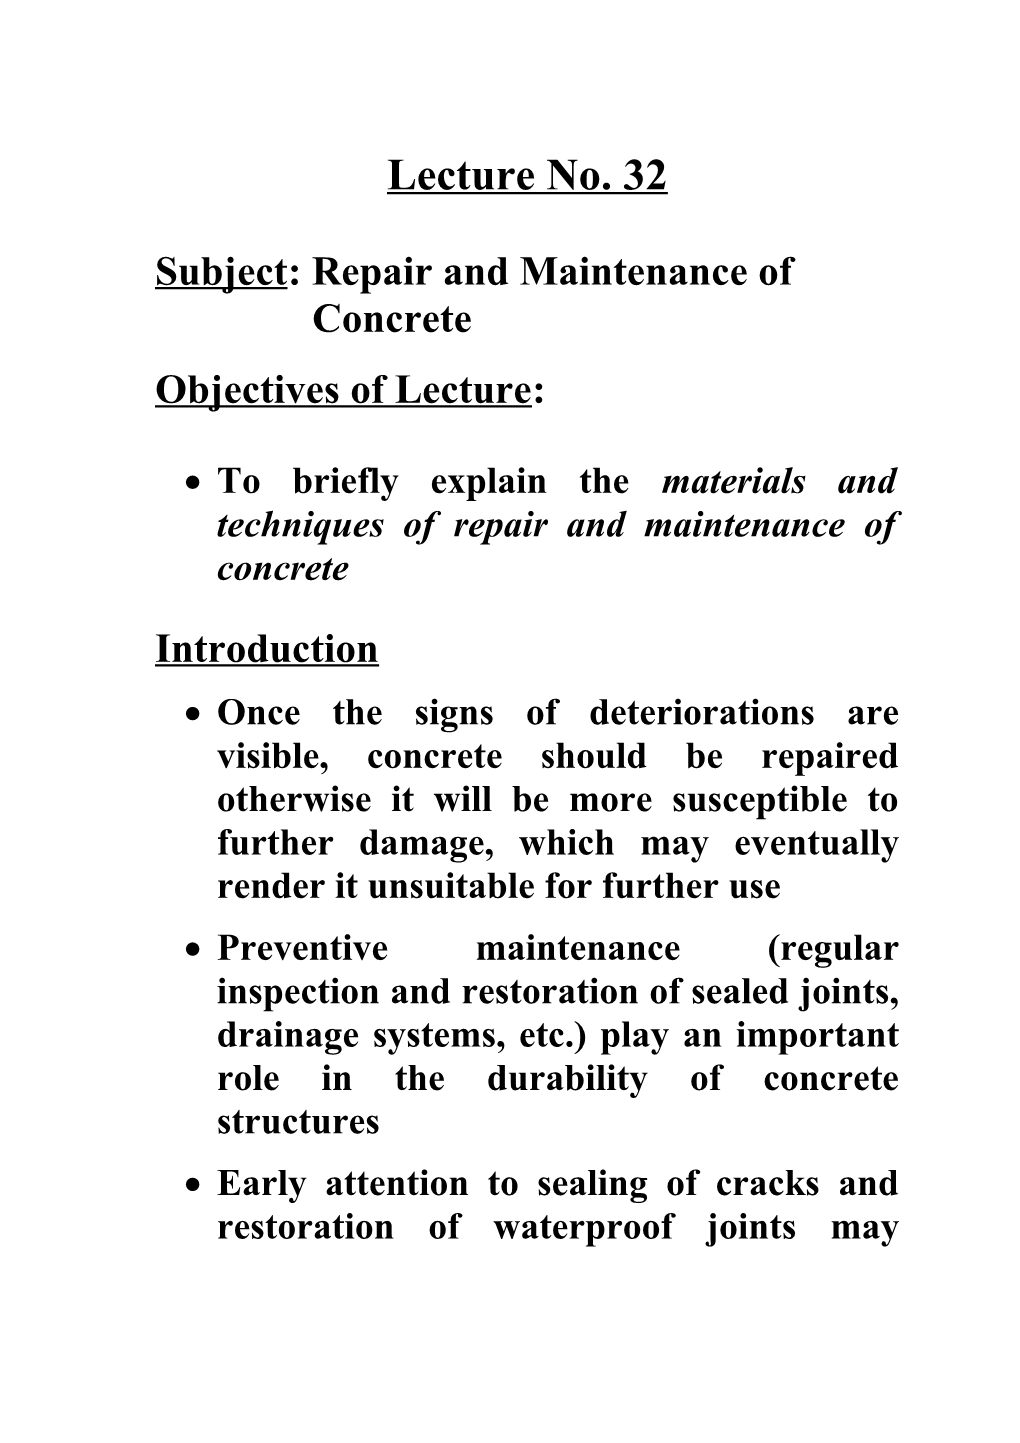 Subject: Repair and Maintenance of Concrete